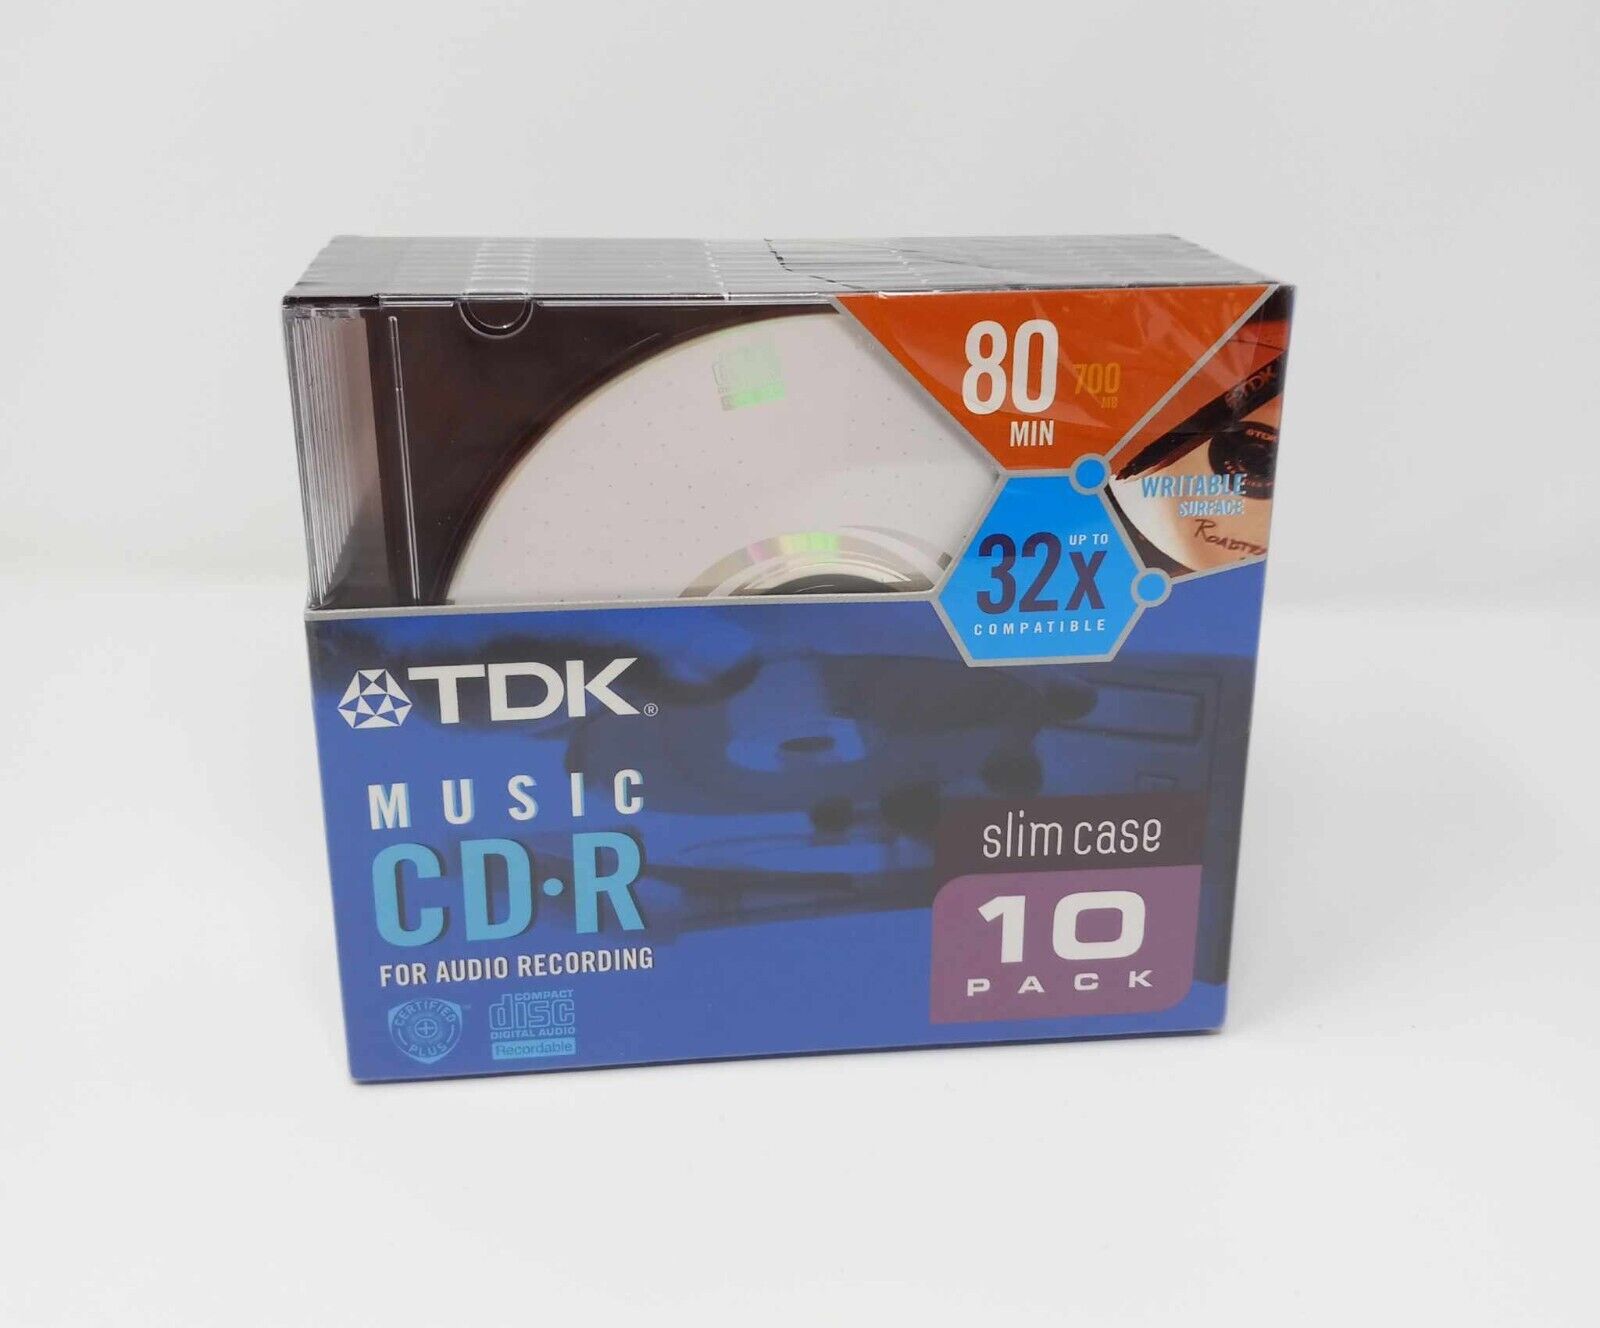 TDK Music 80 Minute 700MB CD-R Slim Case 10 Pack Disc For Audio Recording NEW